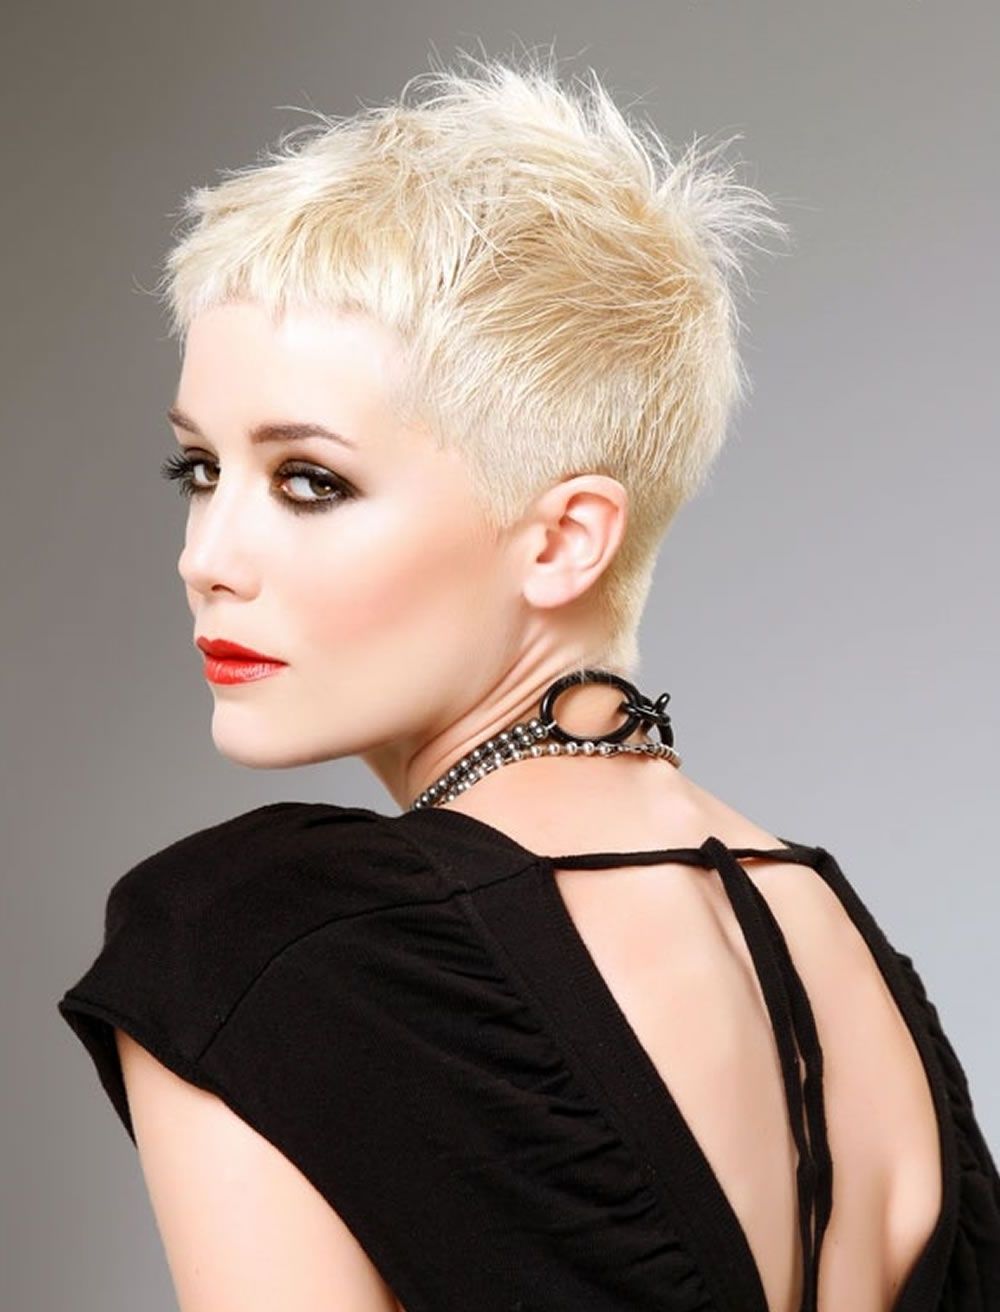 2018 Very Short Pixie Hairstyles & Haircuts Inspiration For Most Current Very Short Pixie Hairstyles For Women (View 5 of 15)